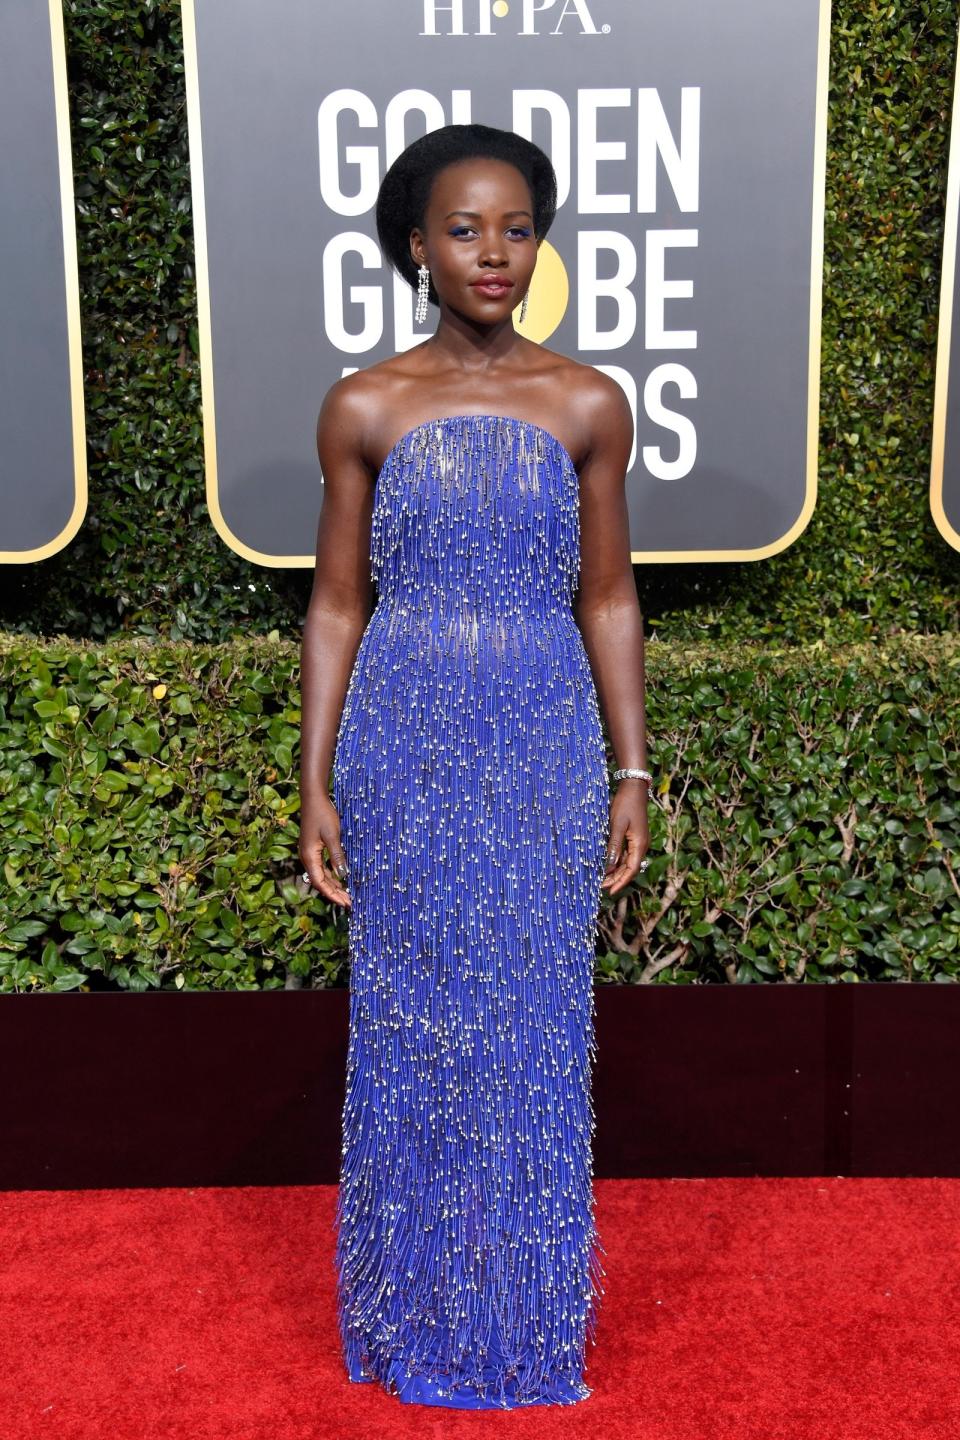 The Best Golden Globes Dresses of All Time